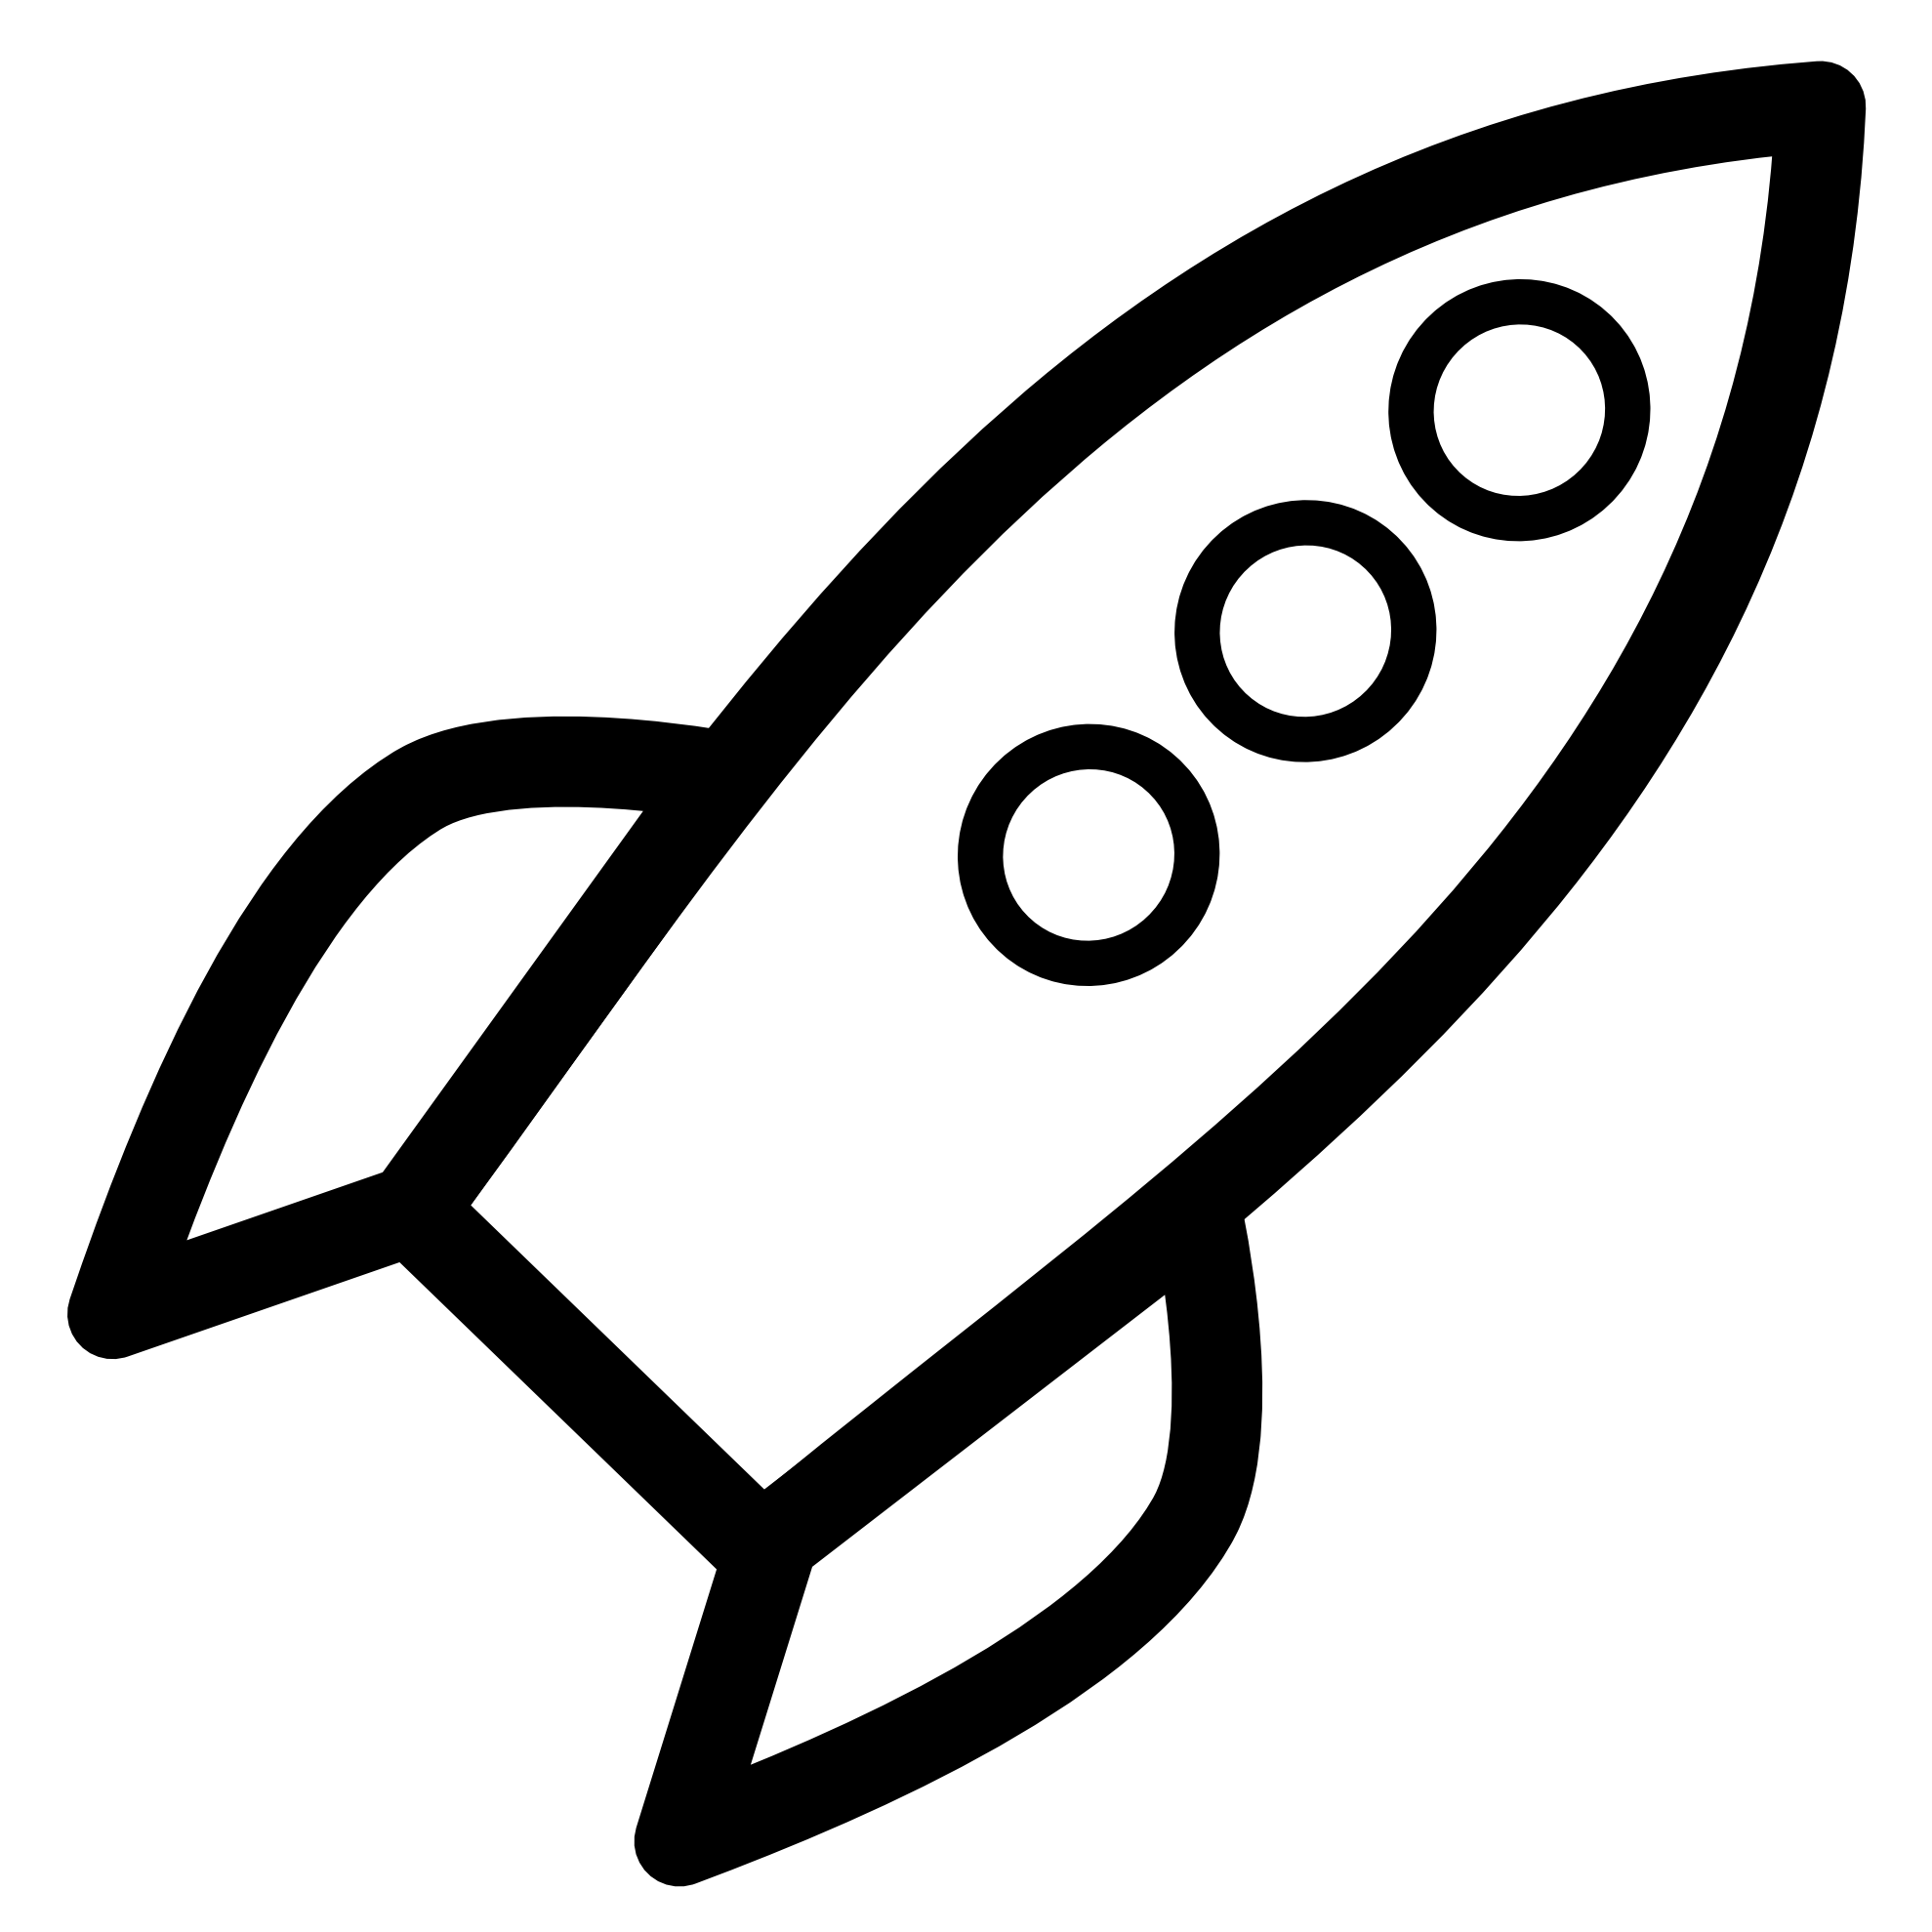 Rocket Drawing Easy For Kids | How To Draw Rocket - Space Craft | Rocket  Drawing Simple | school, craft, drawing, arts, festival | In today's video,  we will learn to draw